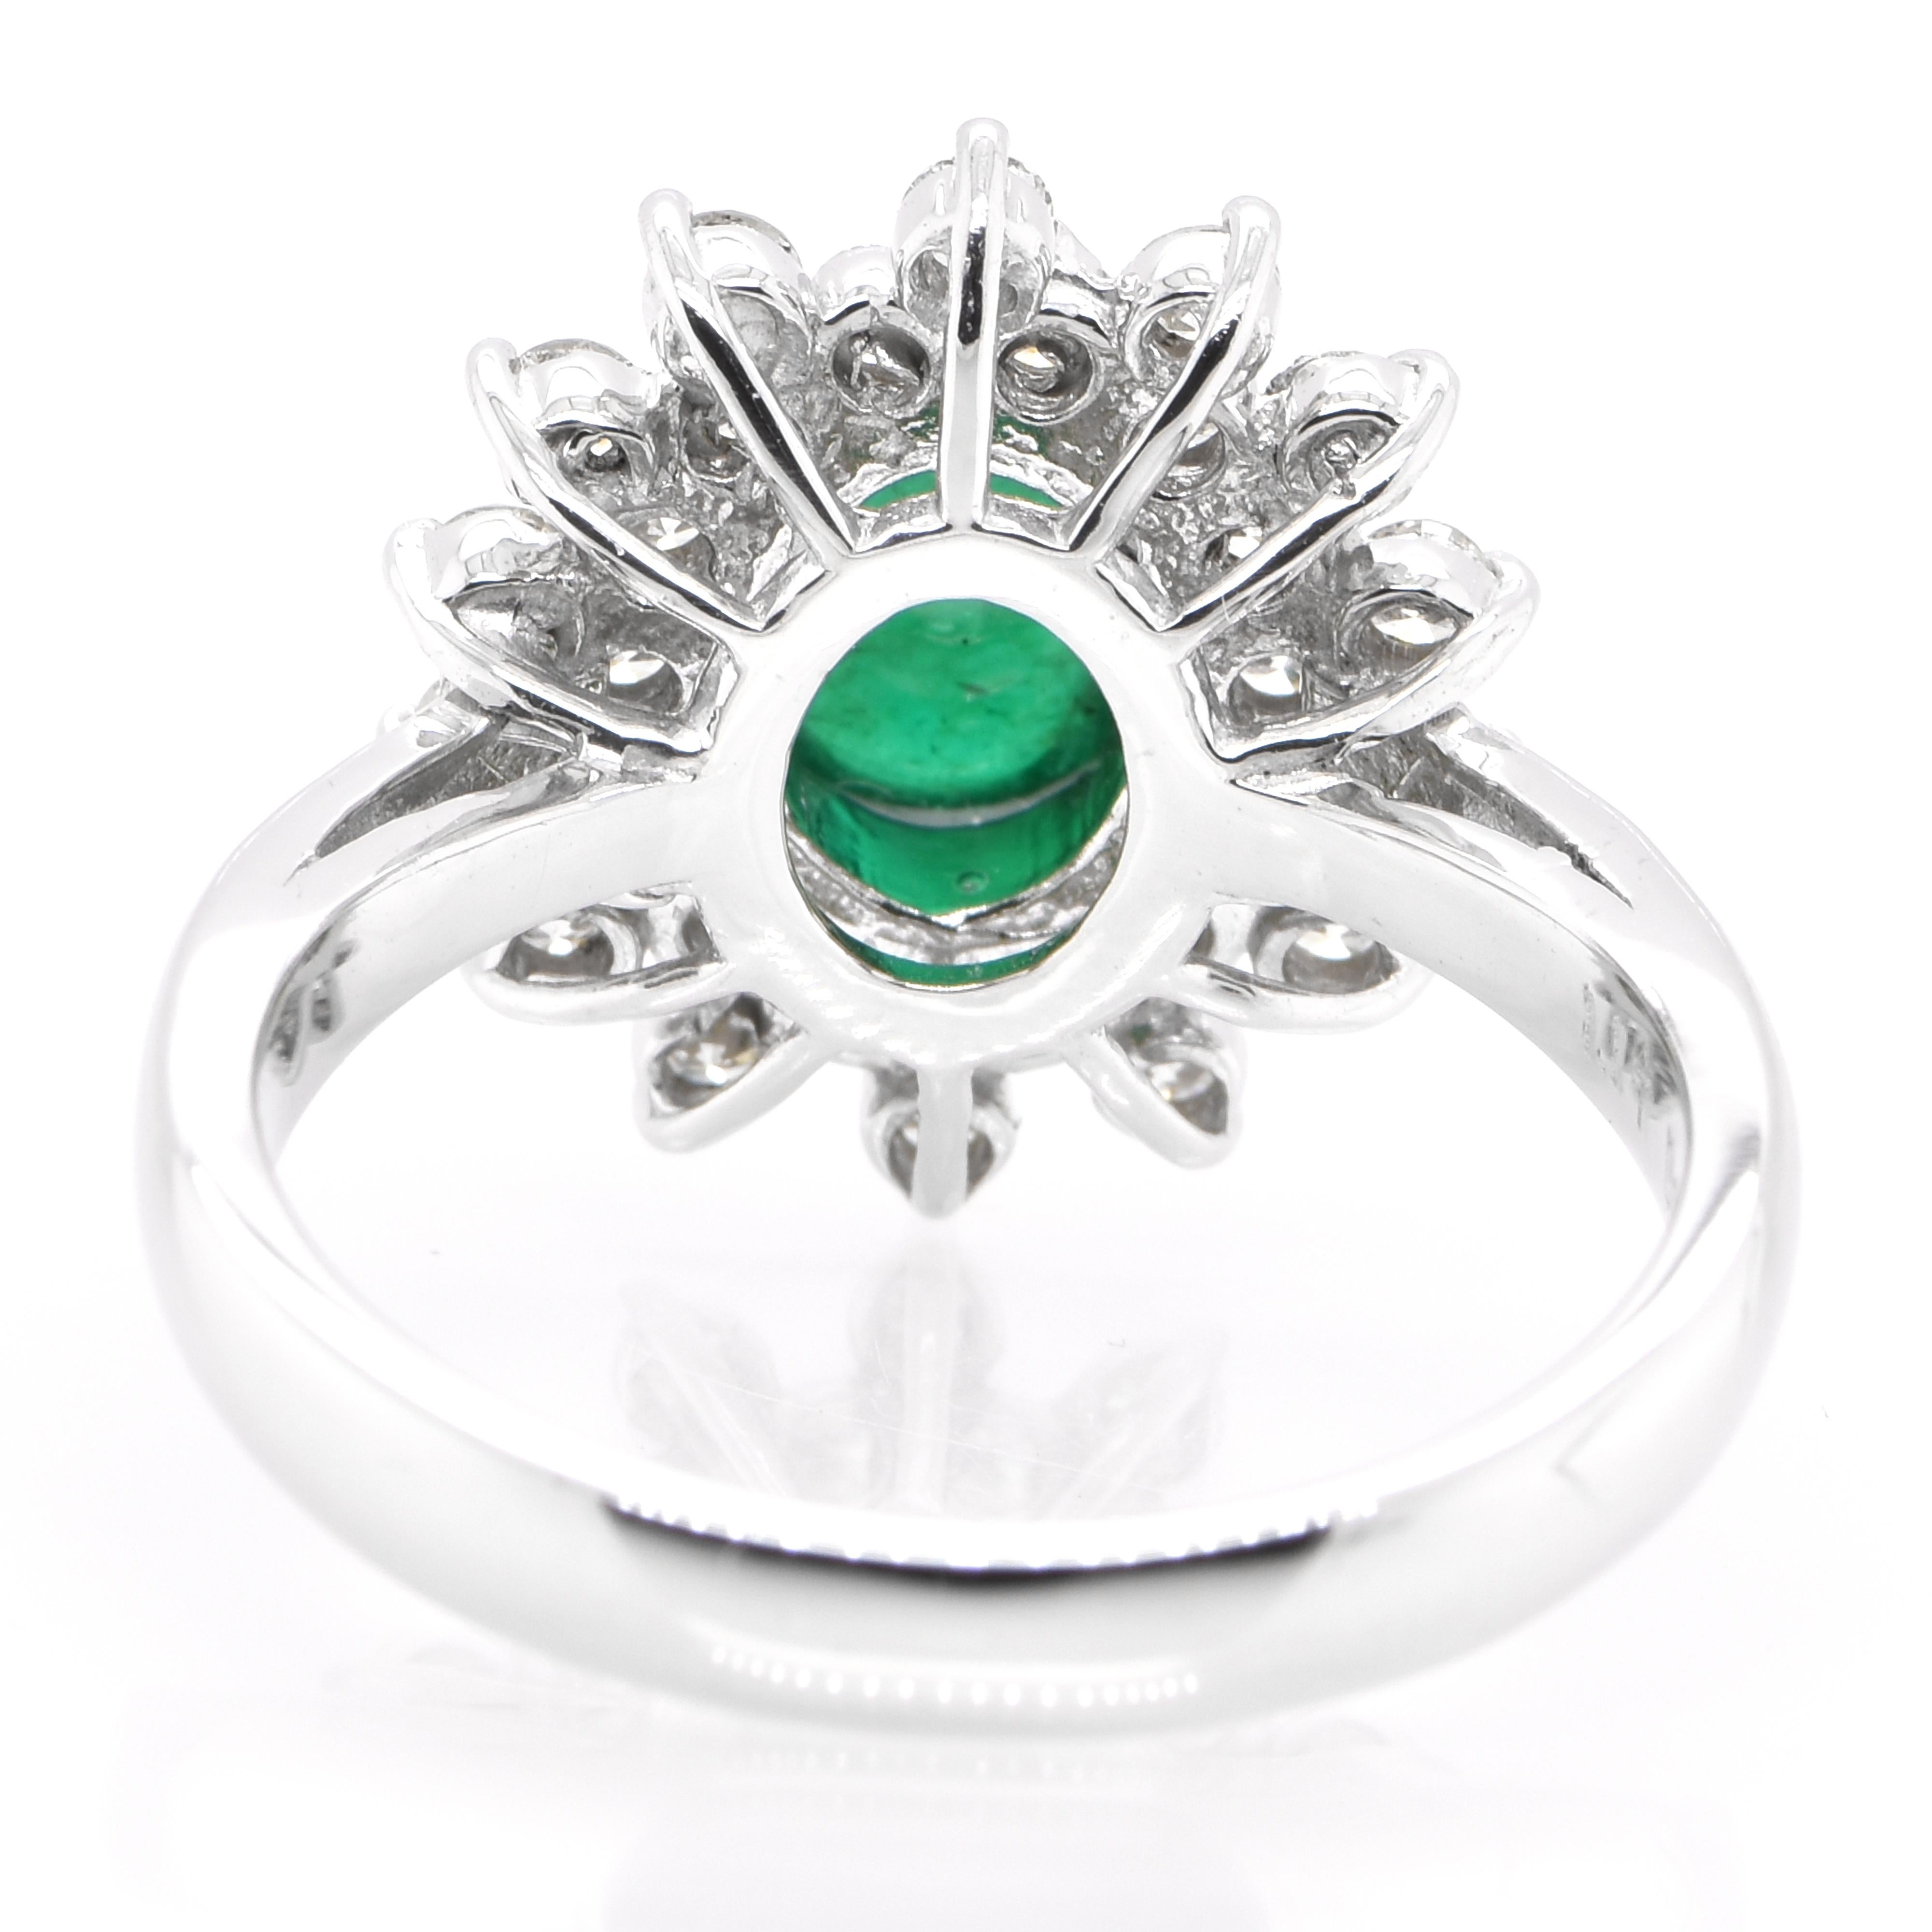 1.17 Carat Natural Emerald Cabochon and Diamond Ring Set in Platinum For Sale 1